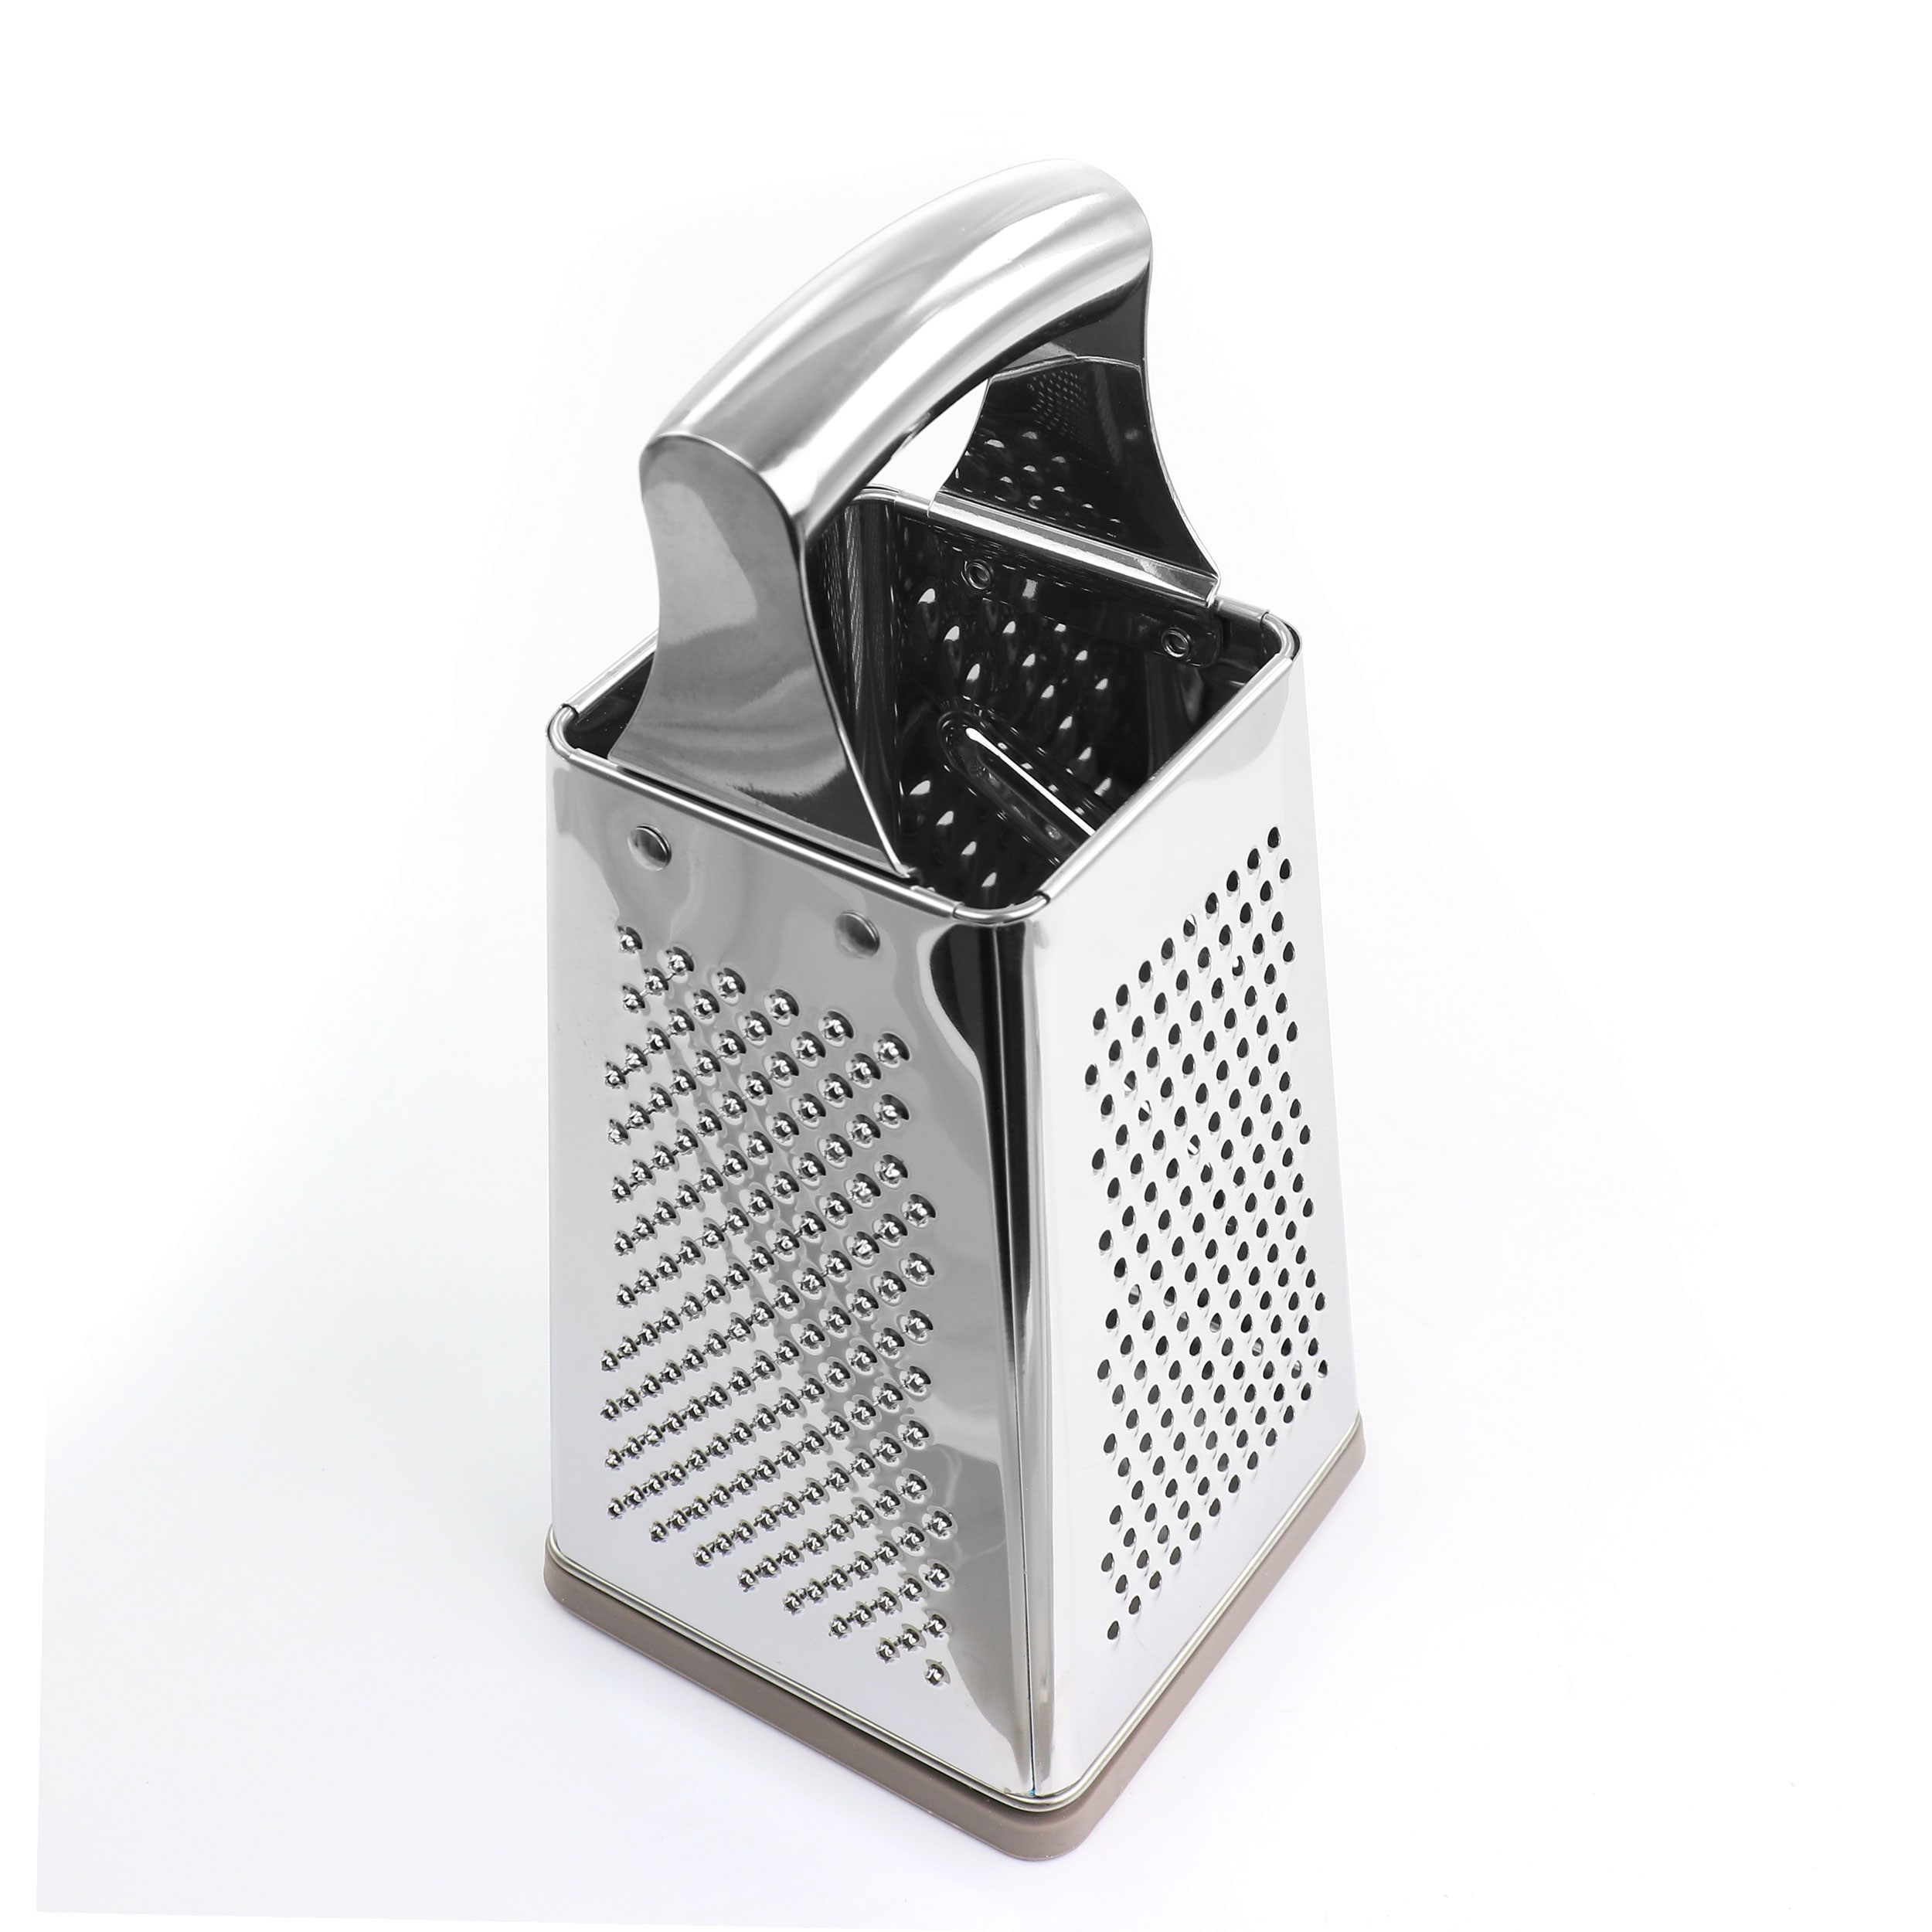 https://ak1.ostkcdn.com/images/products/is/images/direct/b40fdc2a8ad9c53da67700d5a26d71f6afbe14df/Martha-Stewart-Stainless-Steel-4-Sided-Box-Grater.jpg